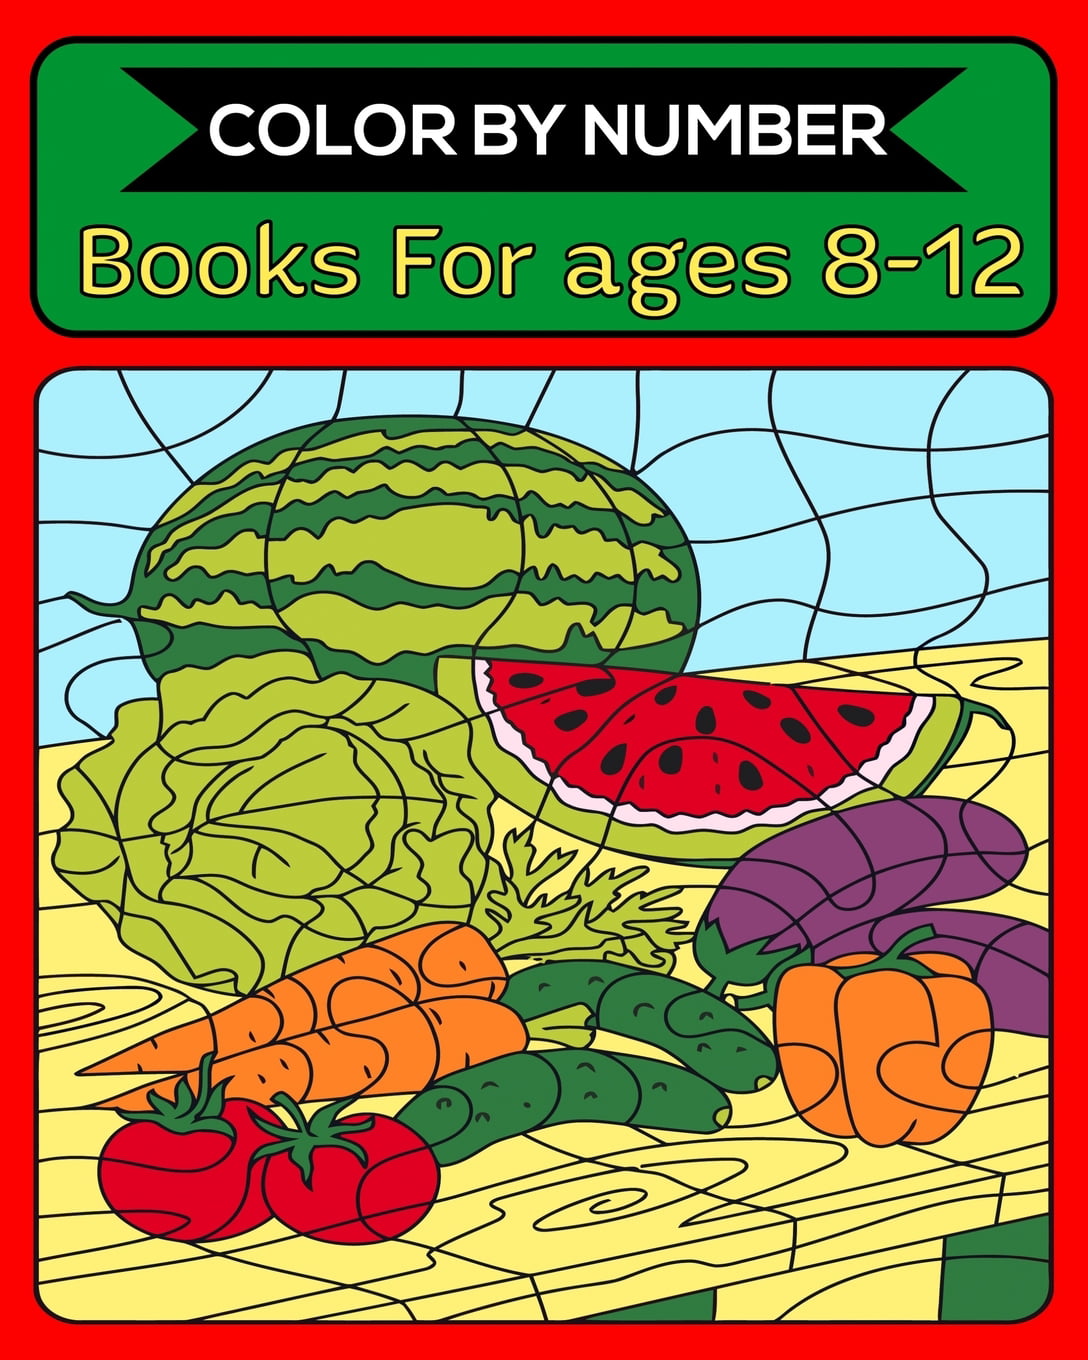 color-by-number-books-for-ages-8-12-50-unique-color-by-number-design